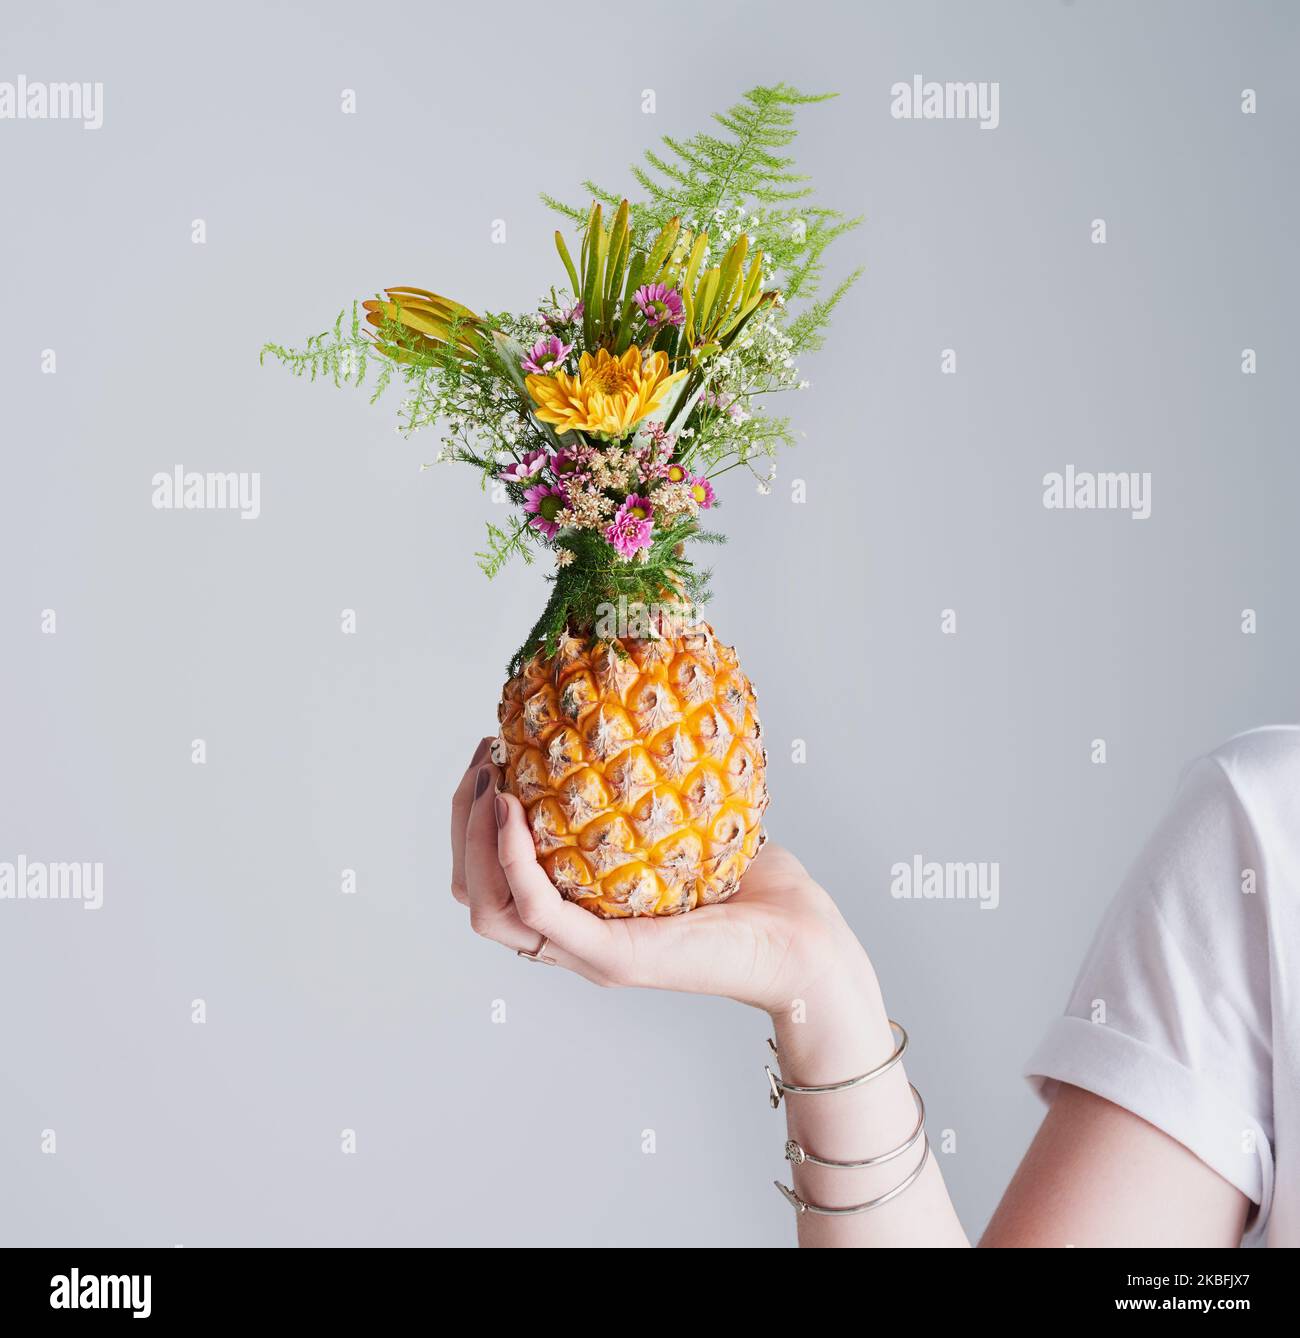 My crown is decorated and beautiful. Studio shot of an unrecognizable woman holding a pineapple against a grey background. Stock Photo